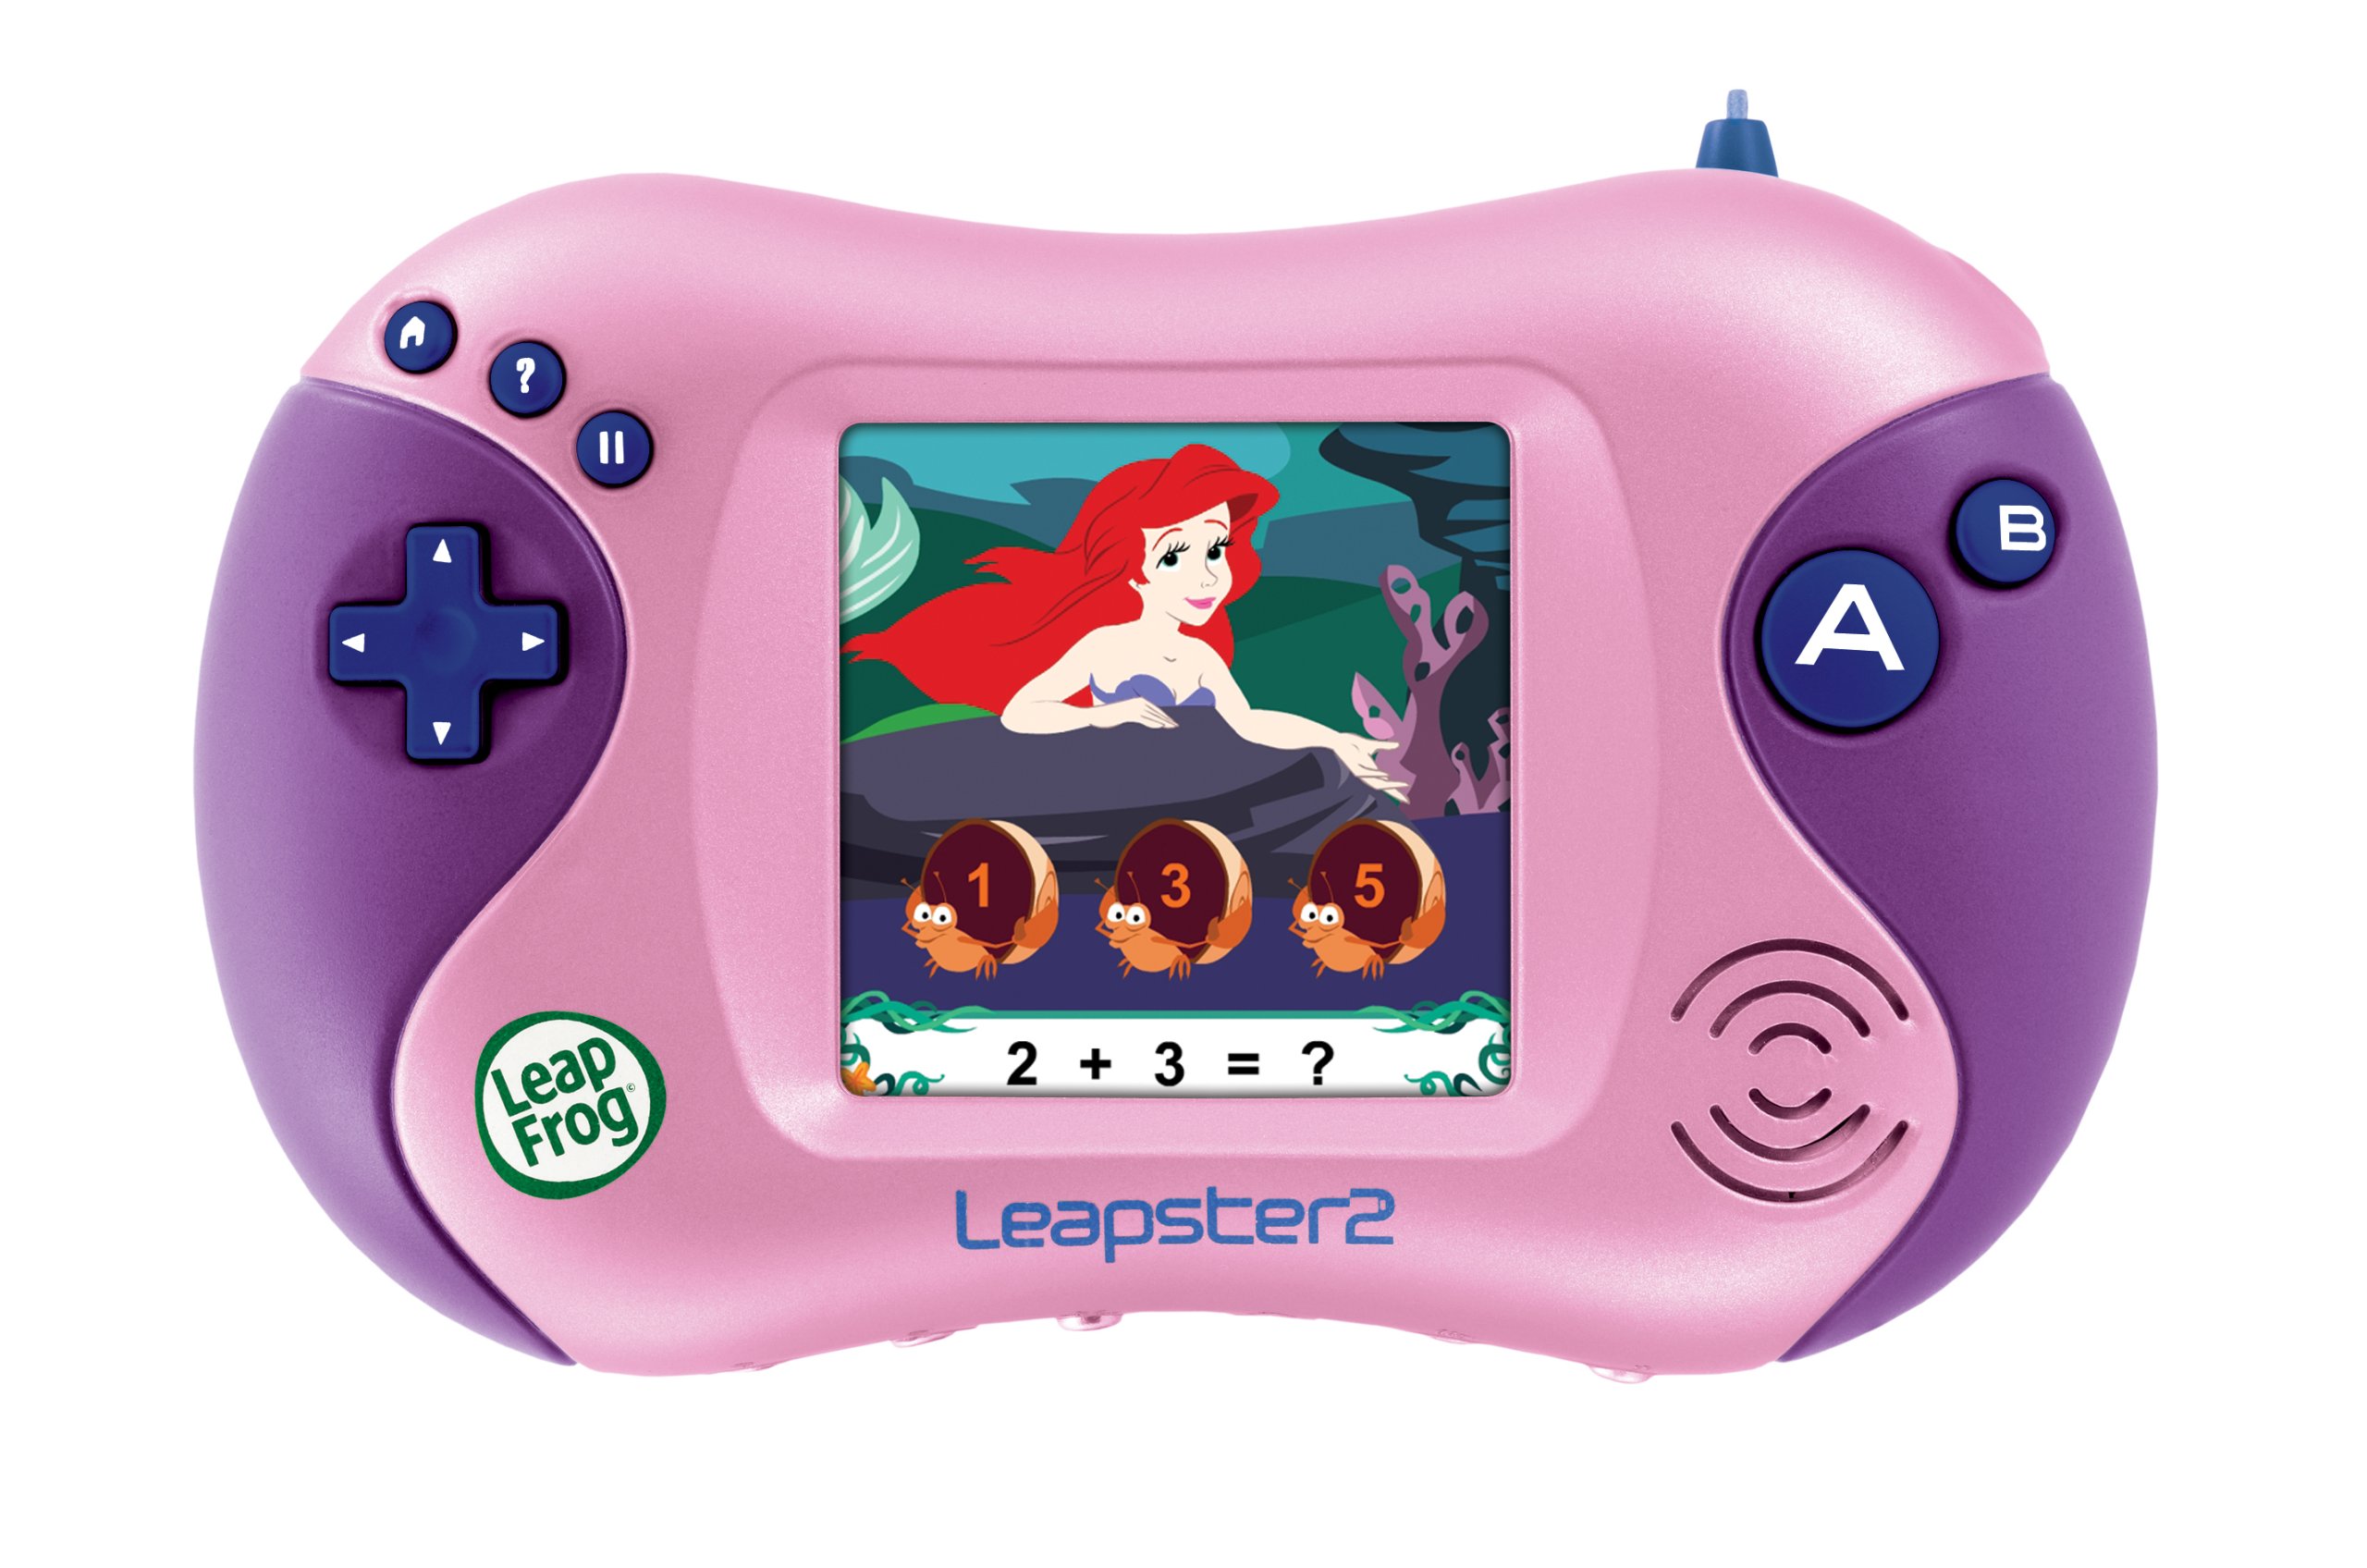 LeapFrog Leapster Learning Game Disney Princess Worlds Of Enchantment